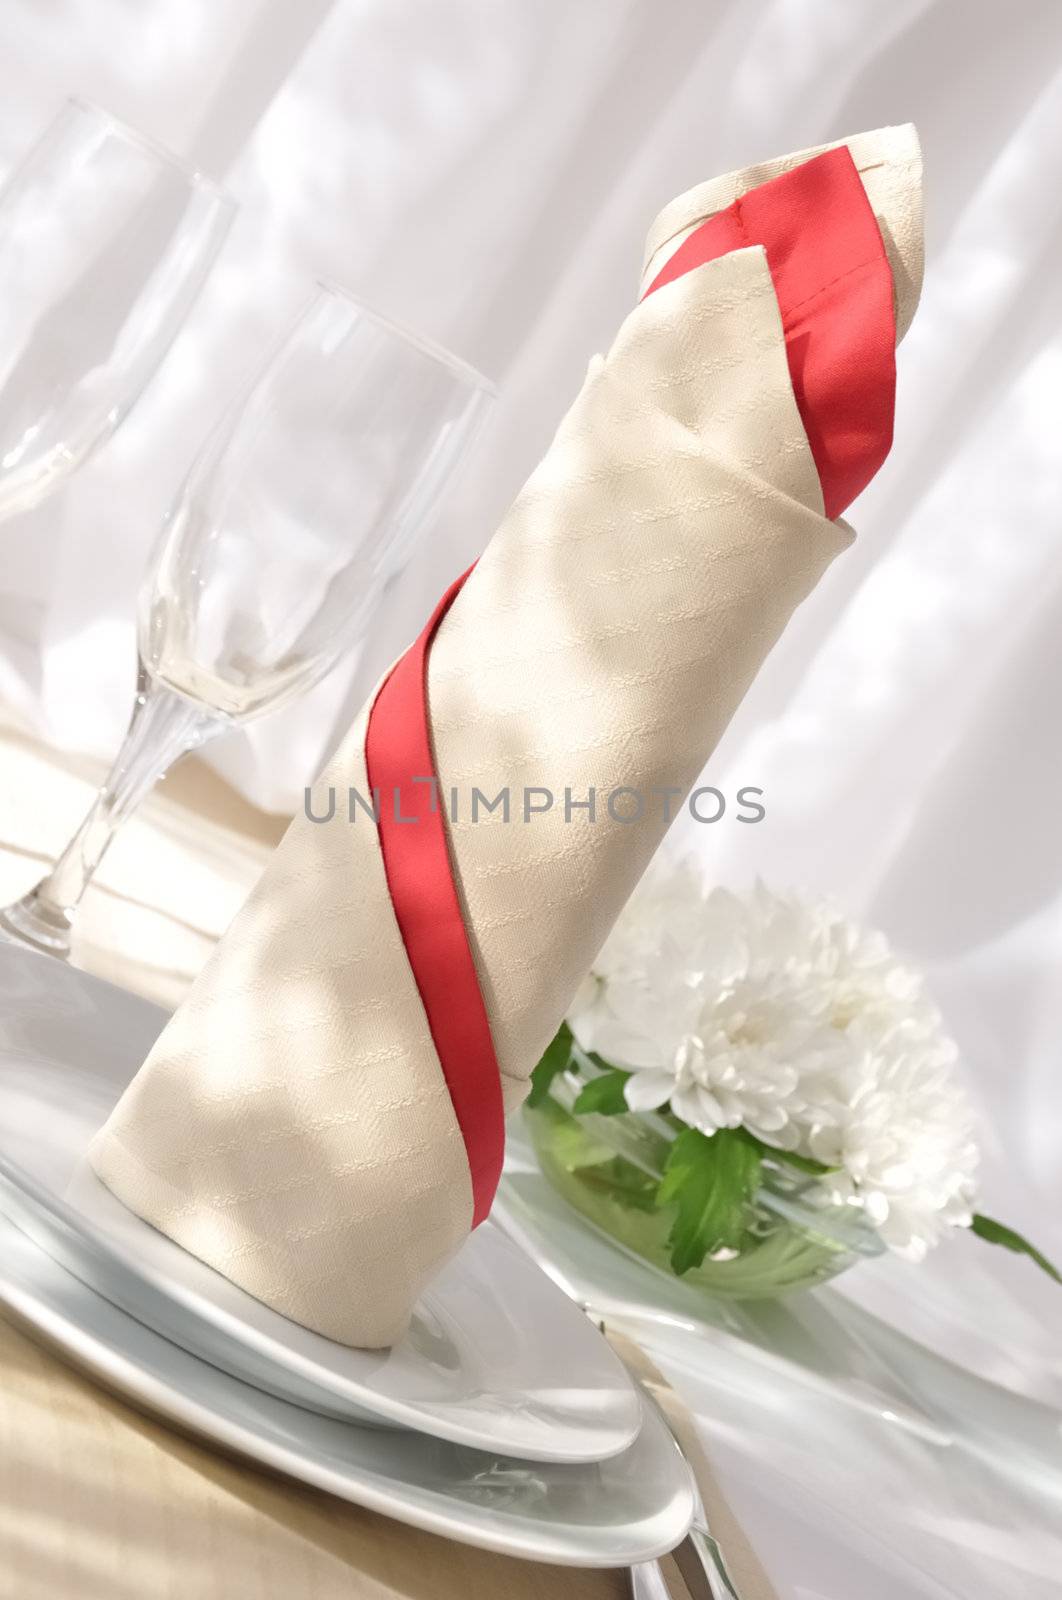 Napkin "Candle" by Apolonia